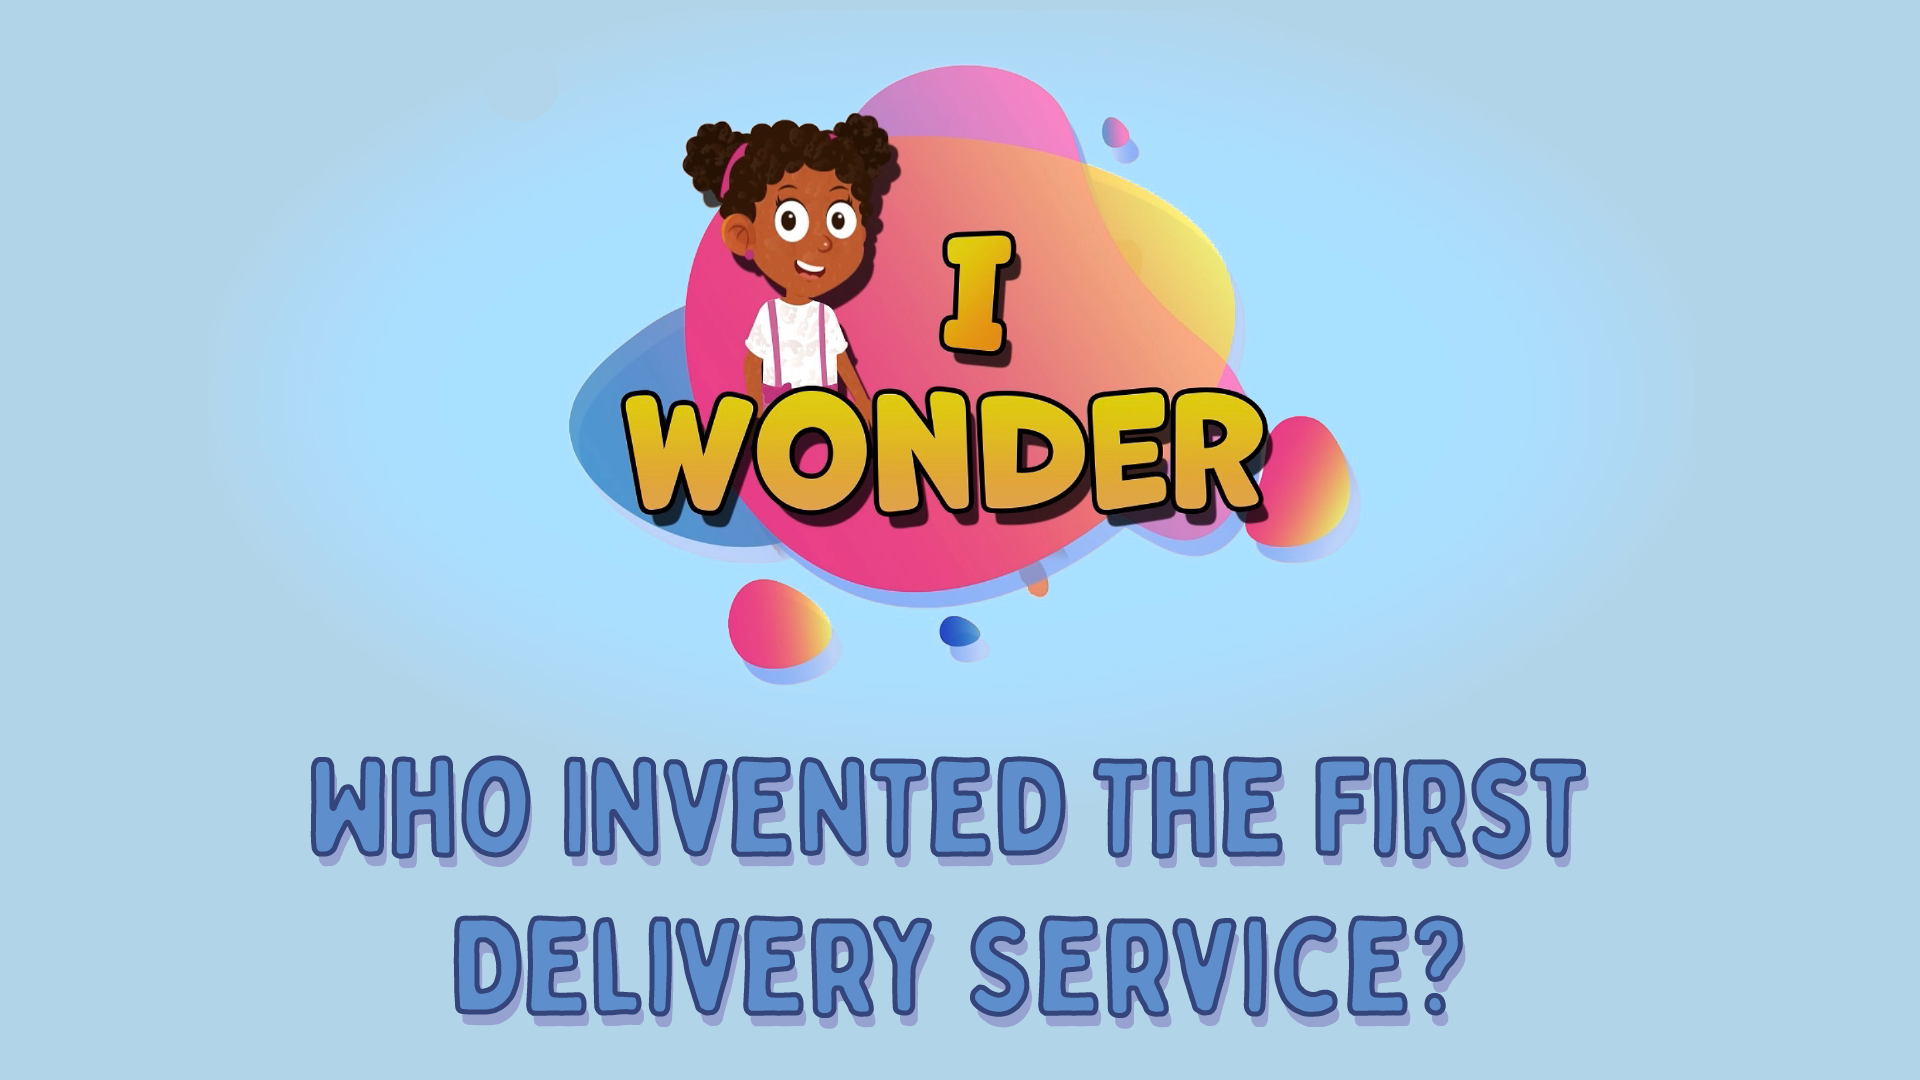 Who Invented The First Delivery Service?